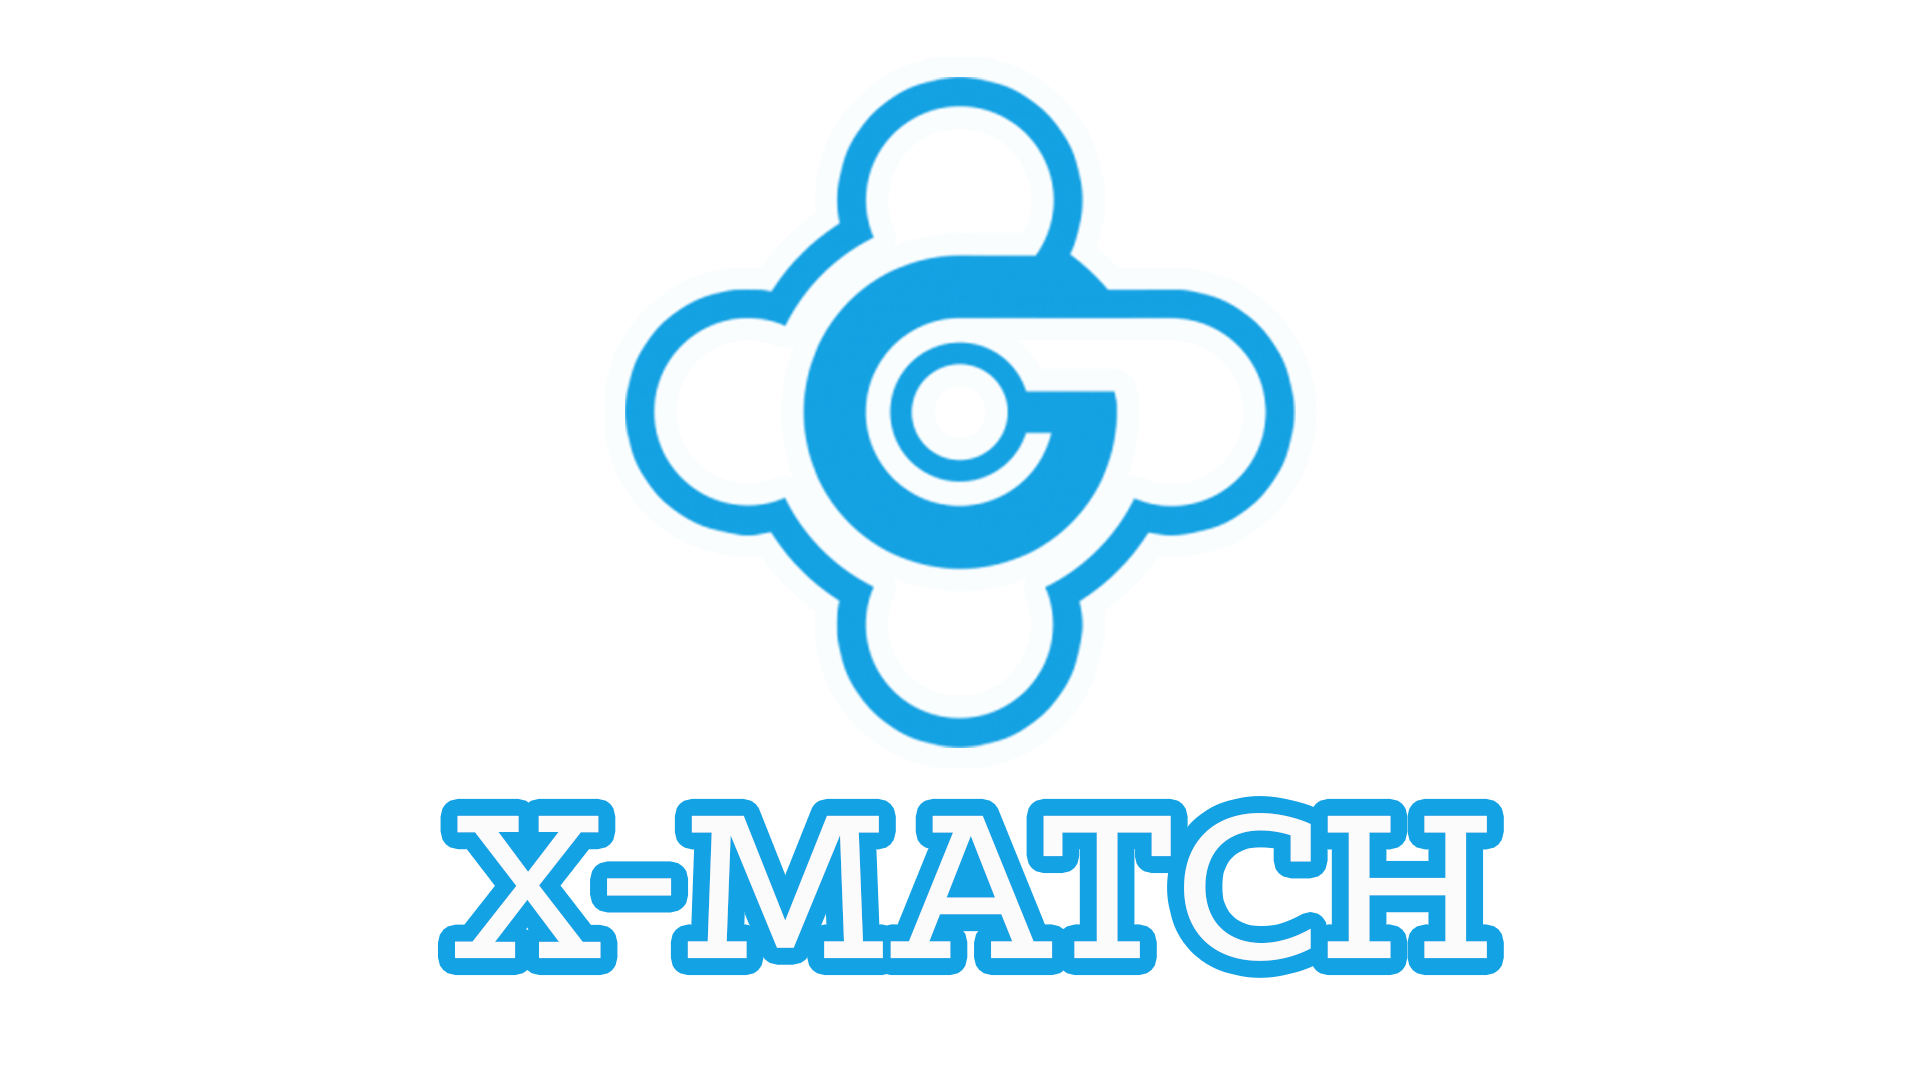 More information about "XMatch"